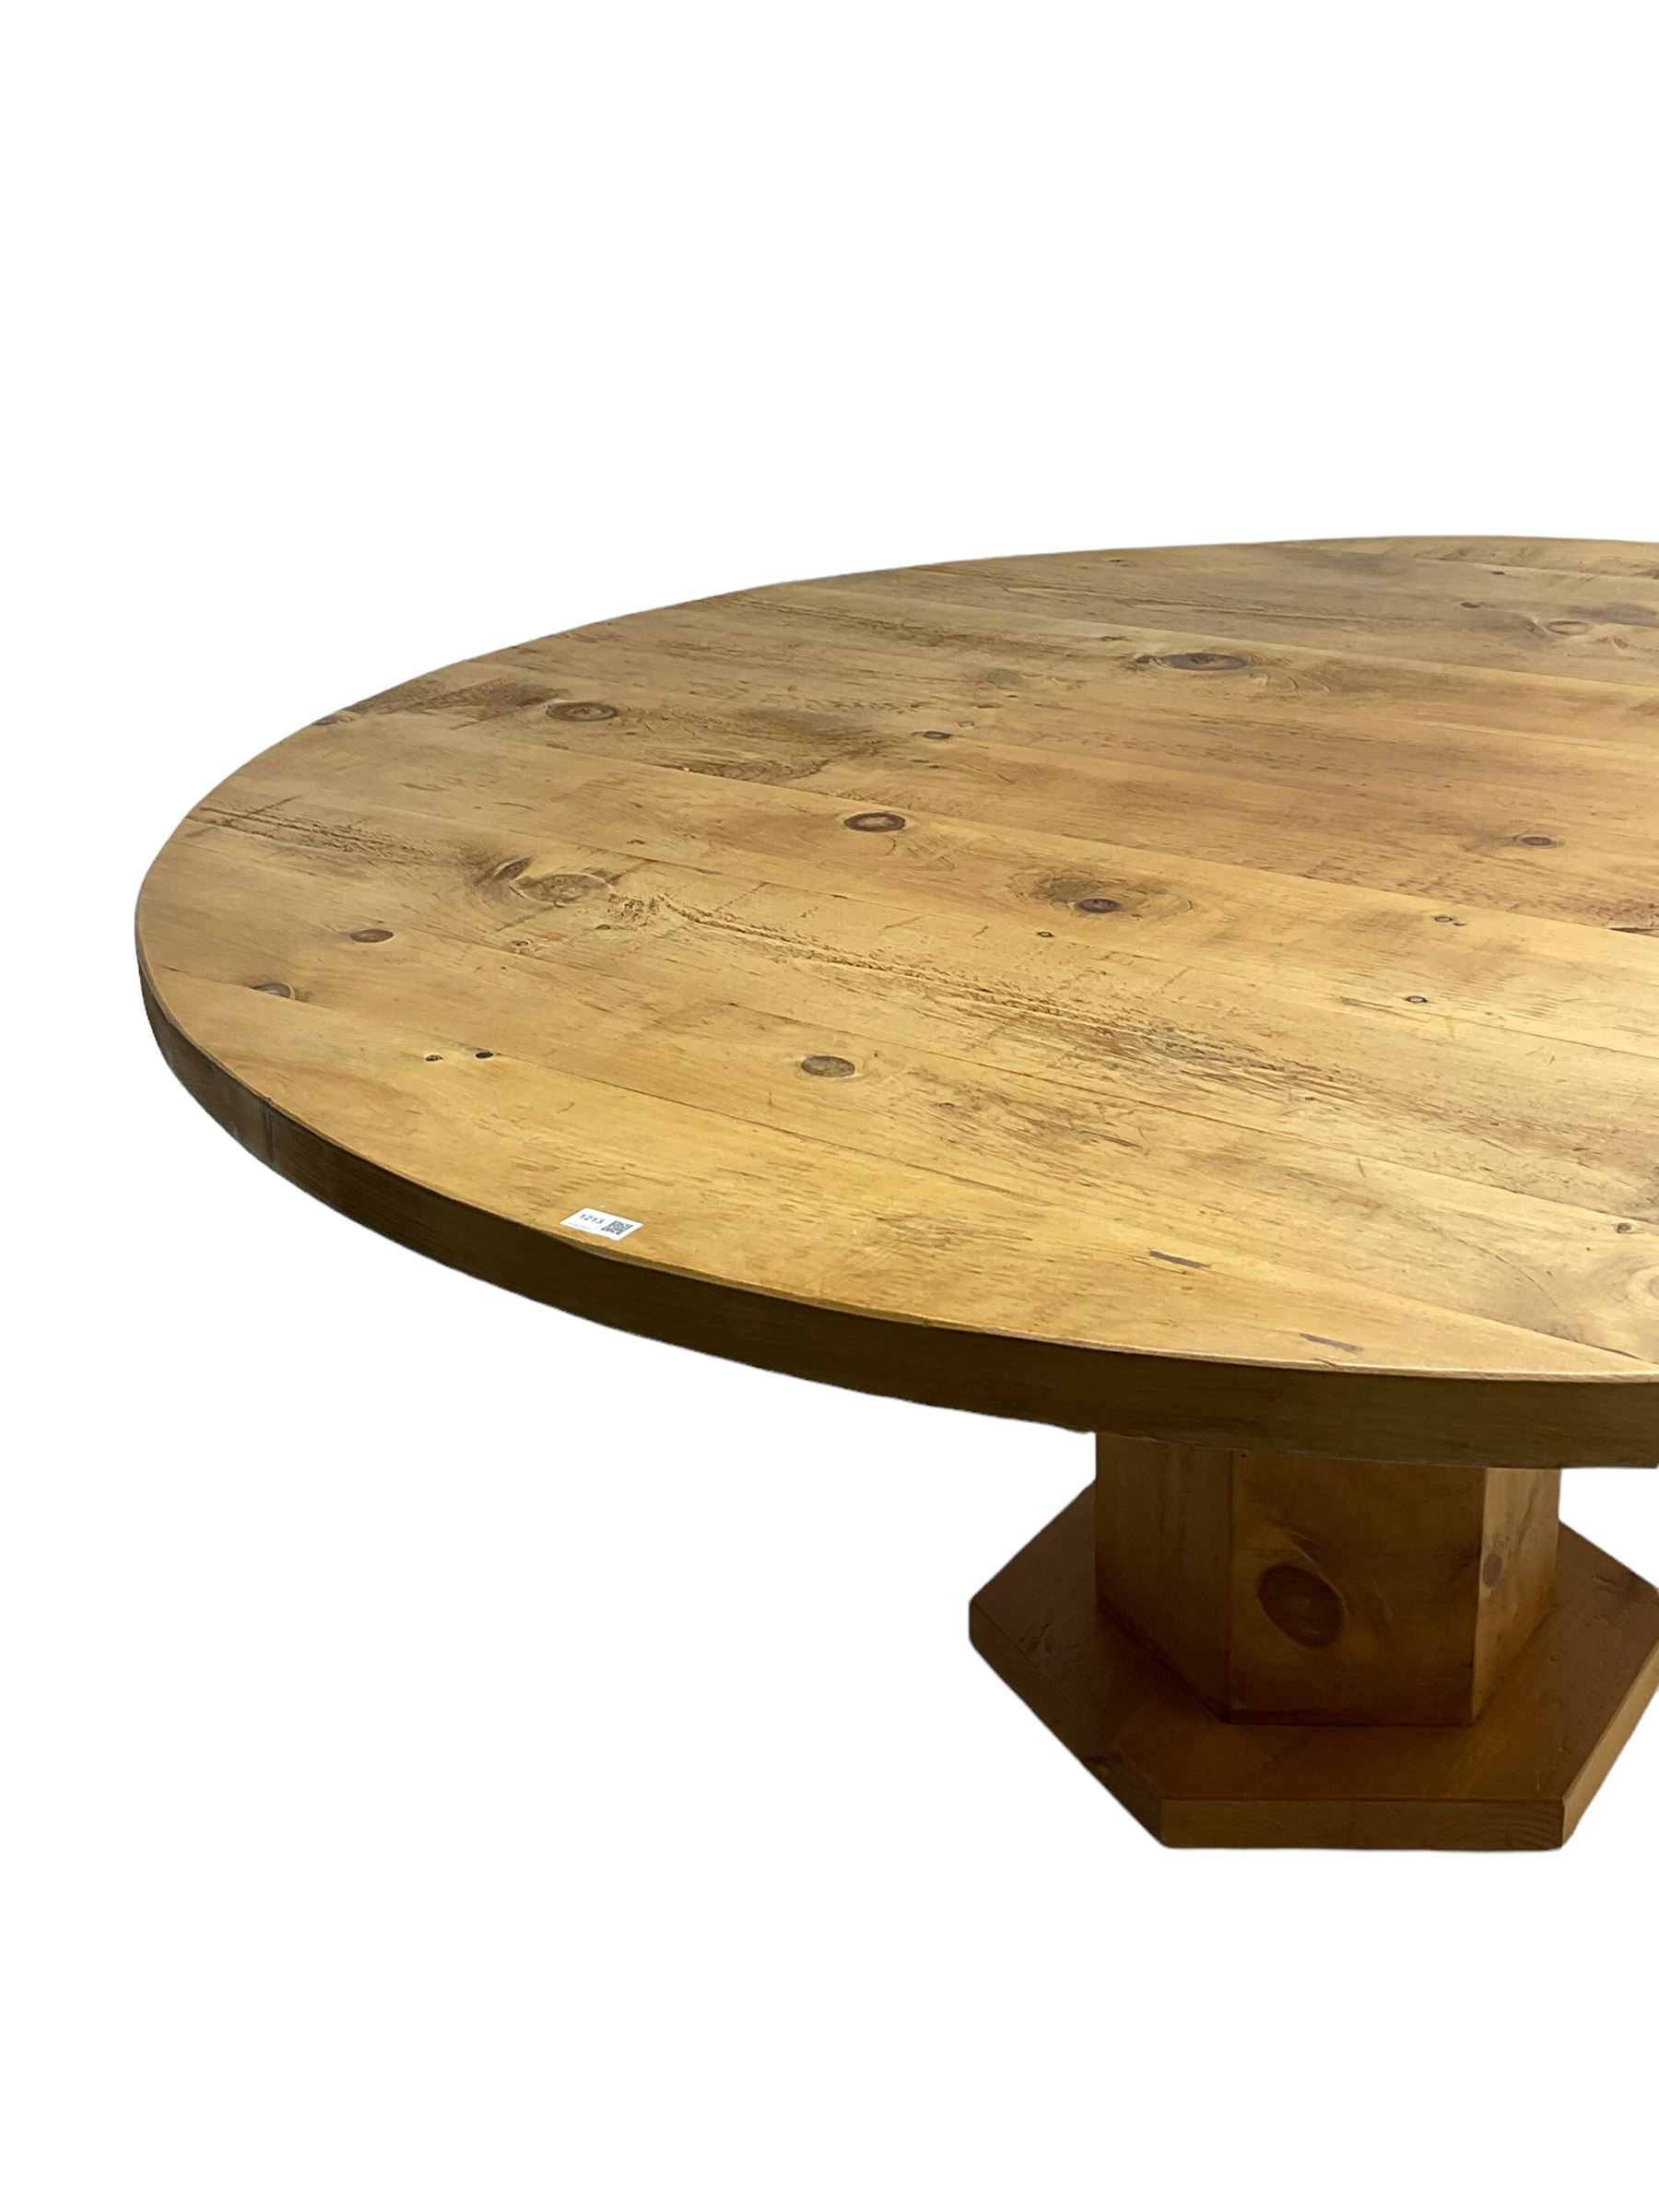 Large rustic waxed pine dining table - Image 6 of 6